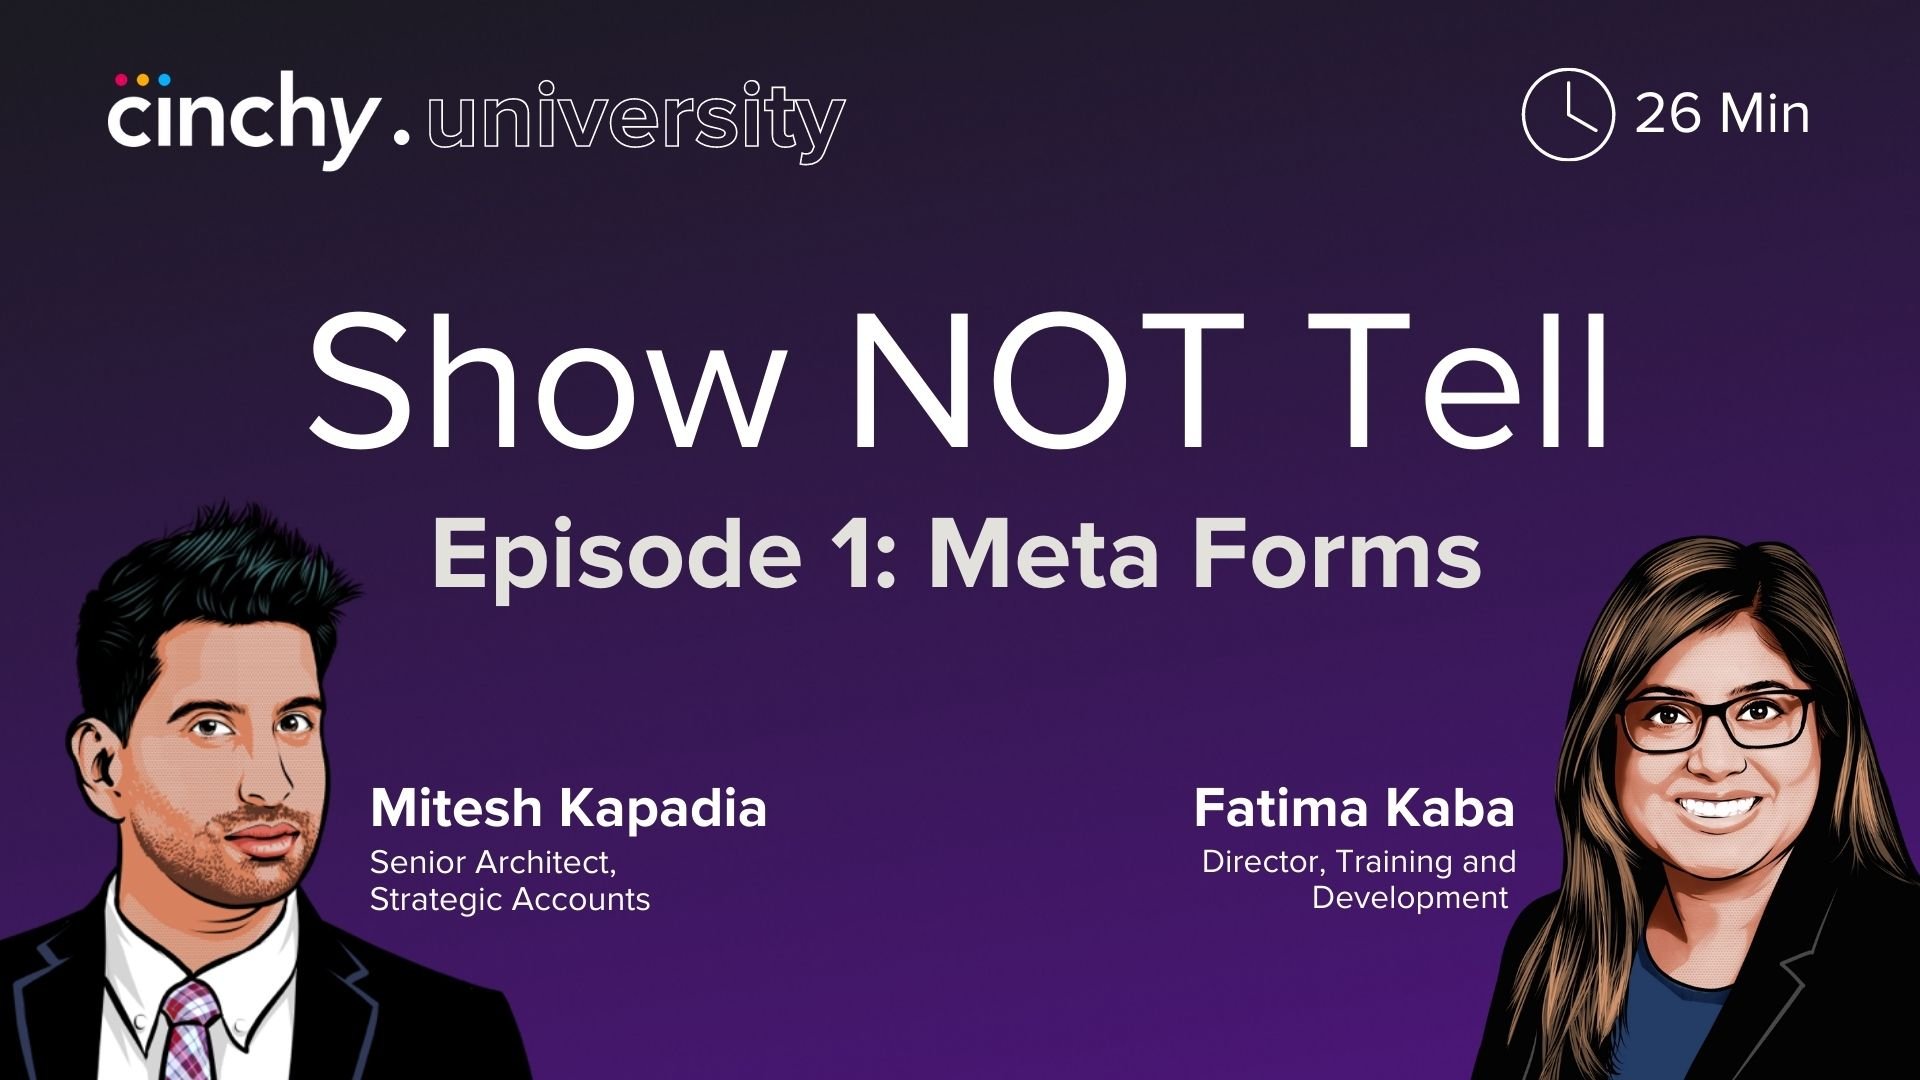 Show NOT Tell  Episode 1: Meta Forms